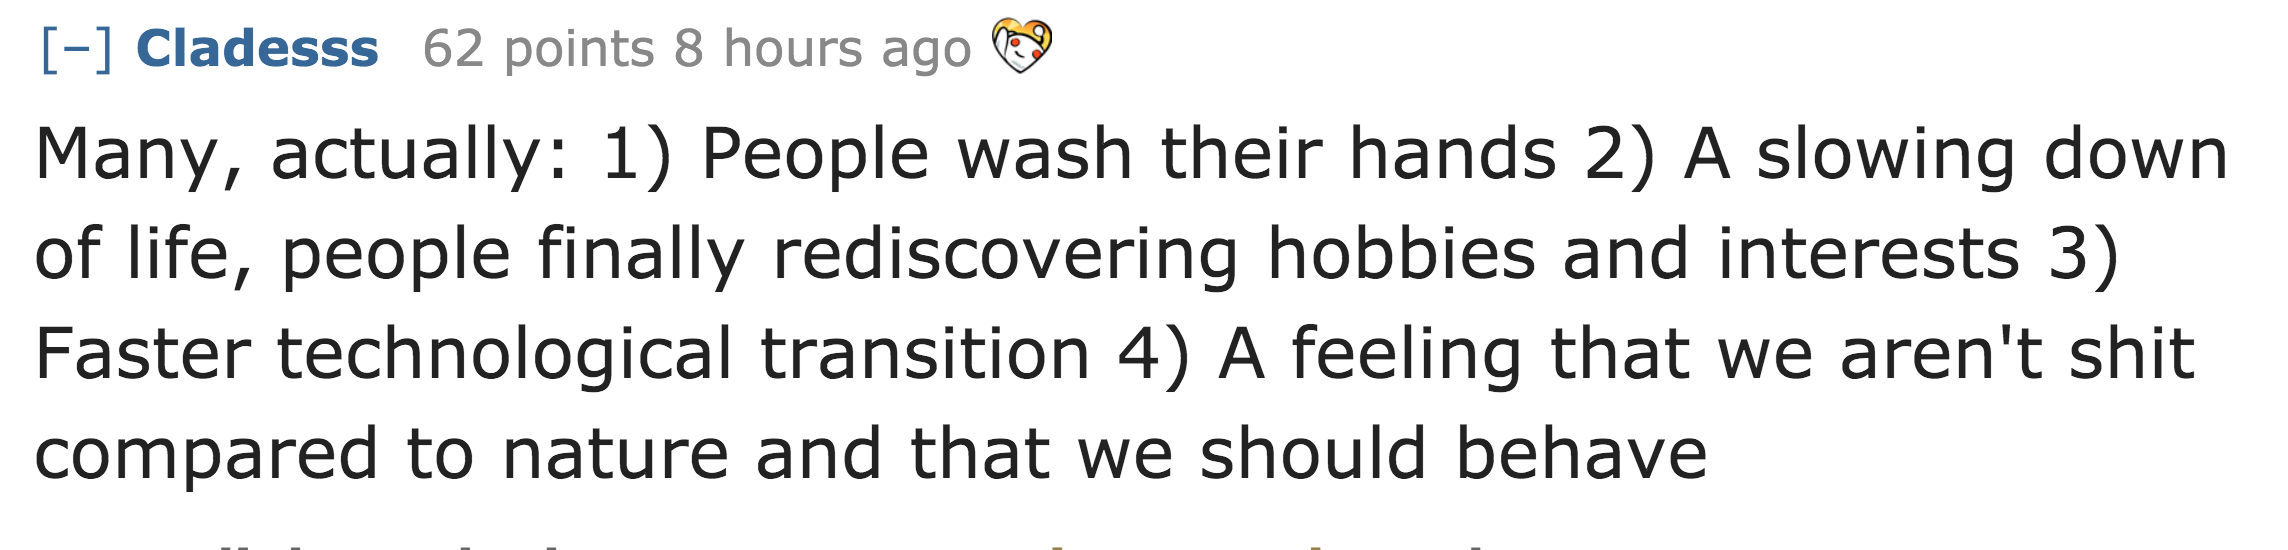 Many, actually 1 People wash their hands 2 A slowing down of life, people finally rediscovering hobbies and interests 3 Faster technological transition 4 A feeling that we aren't shit compared to nature and that we